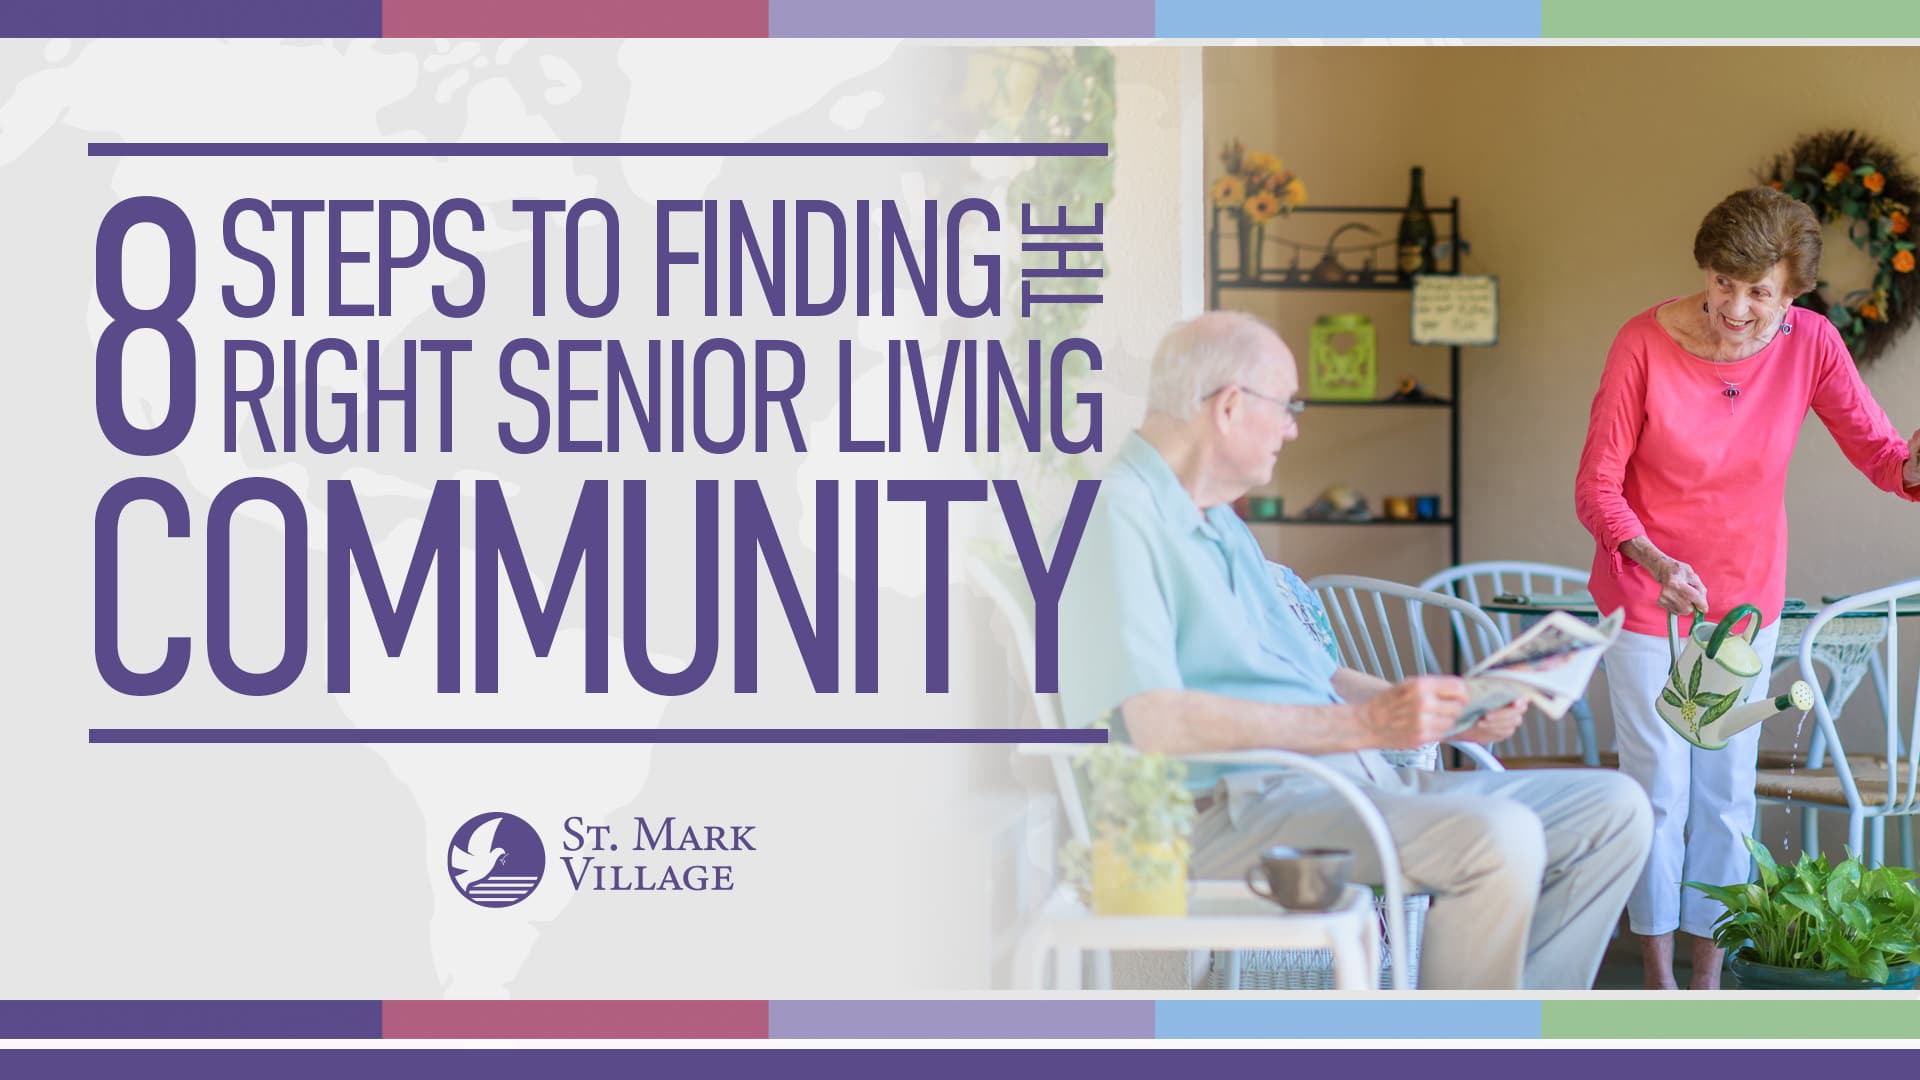 8 steps to finding the right senior living community.